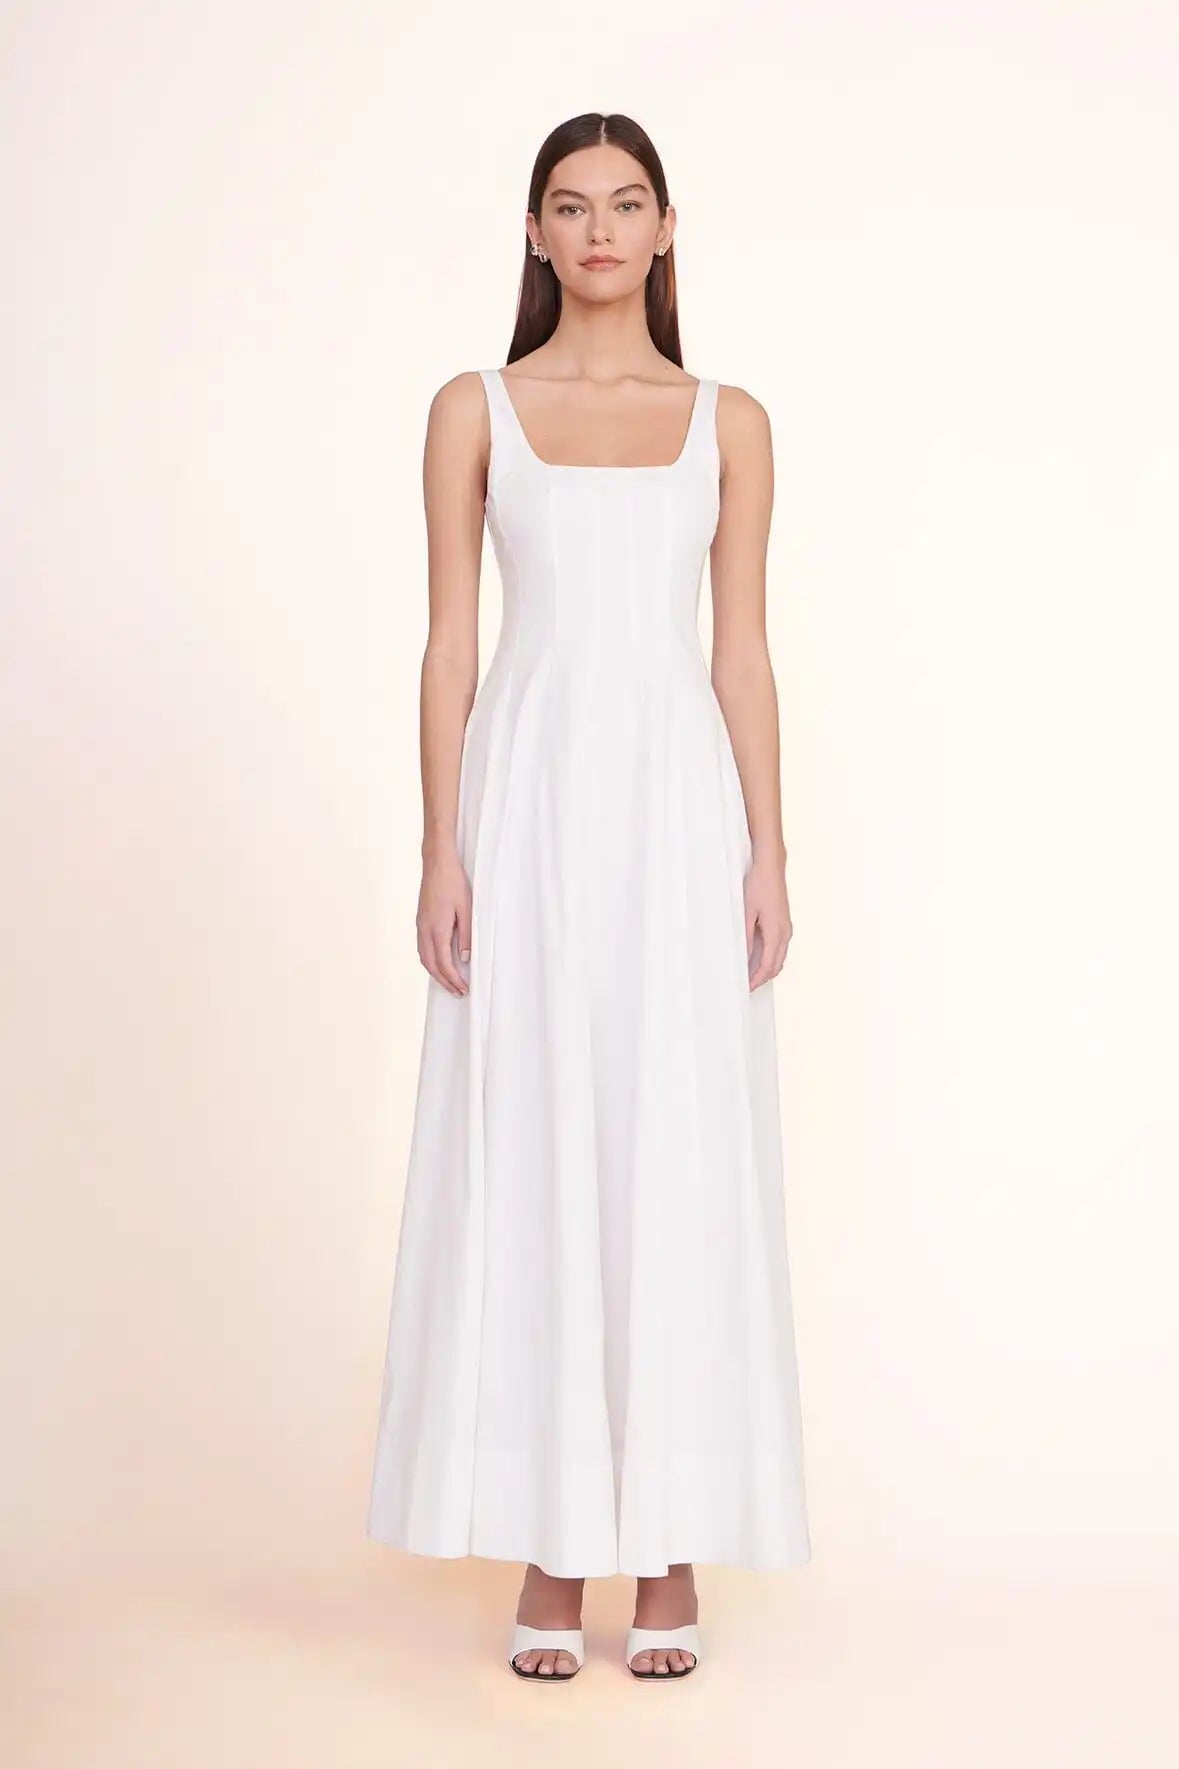 Stylishly elegant, the STAUD Wells Maxi Dress is a high-quality, designer piece that will make you feel confident and beautiful at any event. Handmade and customizable, this dress is perfect for a banquet or any upscale occasion. Make a statement with this stunning, one-of-a-kind dress.